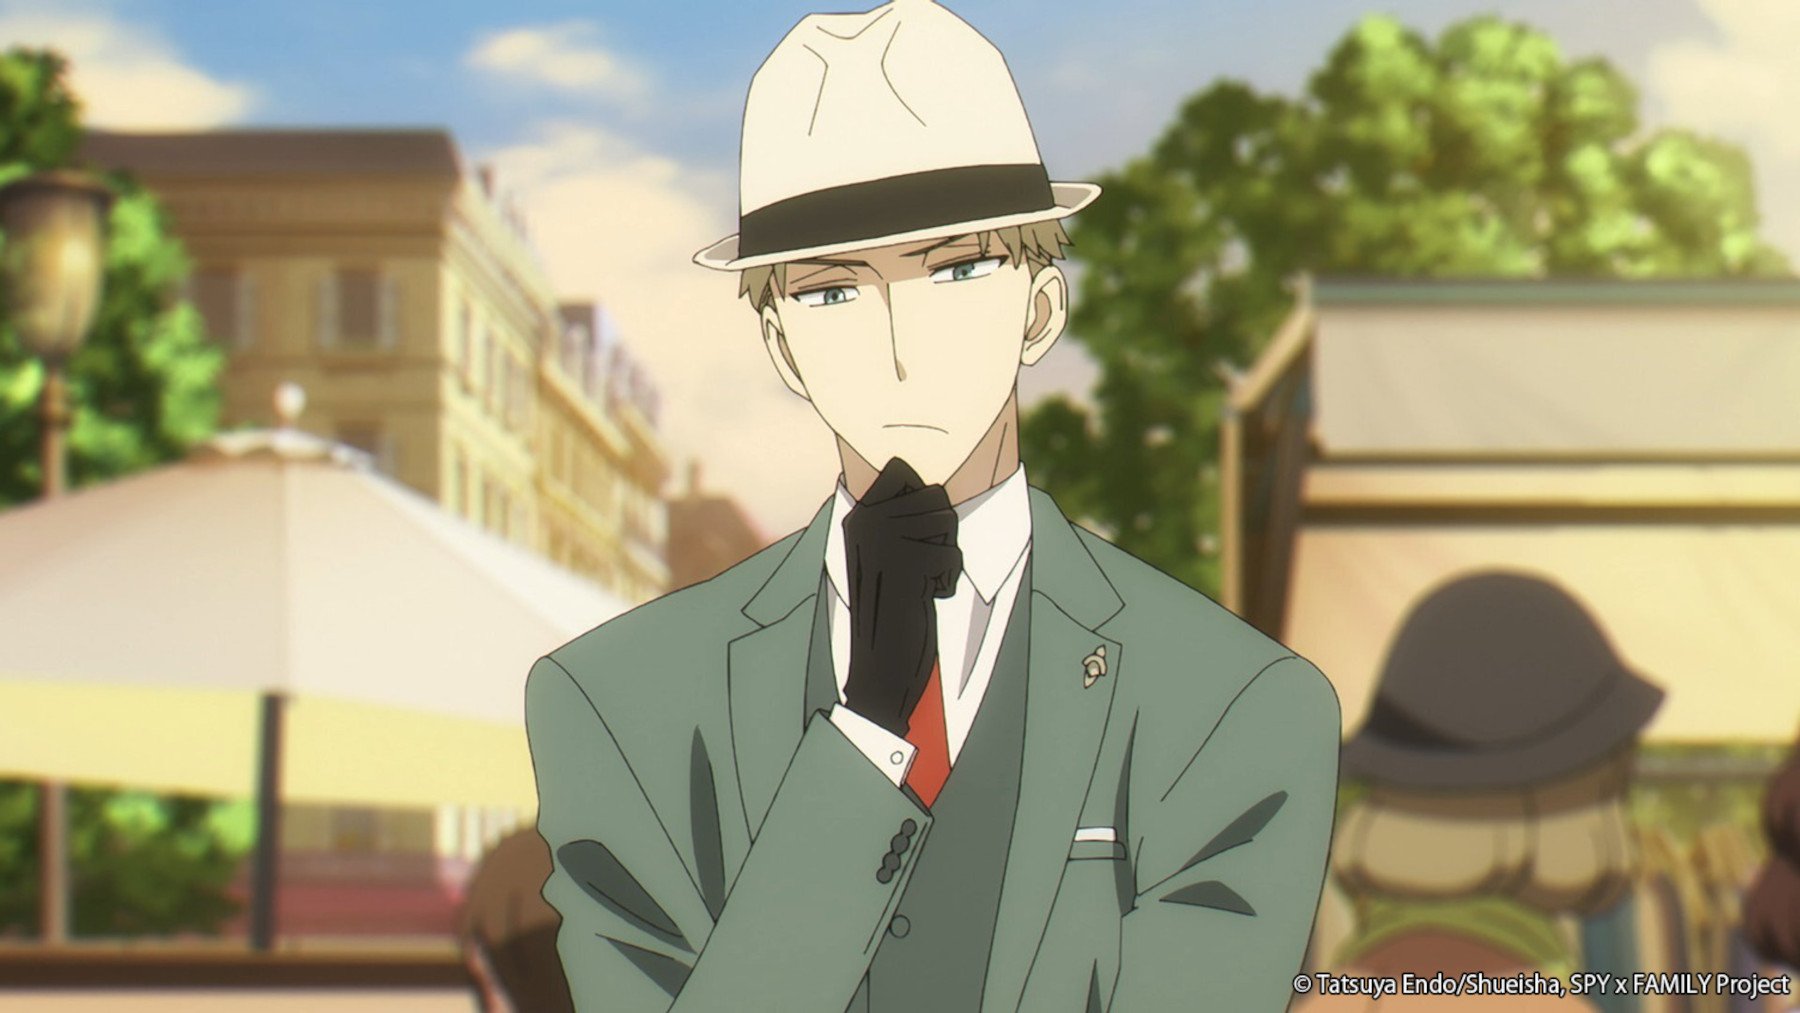 Twilight/Loid Forger in 'Spy x Family.' He's wearing a green suit, white hat, and black gloves. He's holding his chin and looks deep in thought.